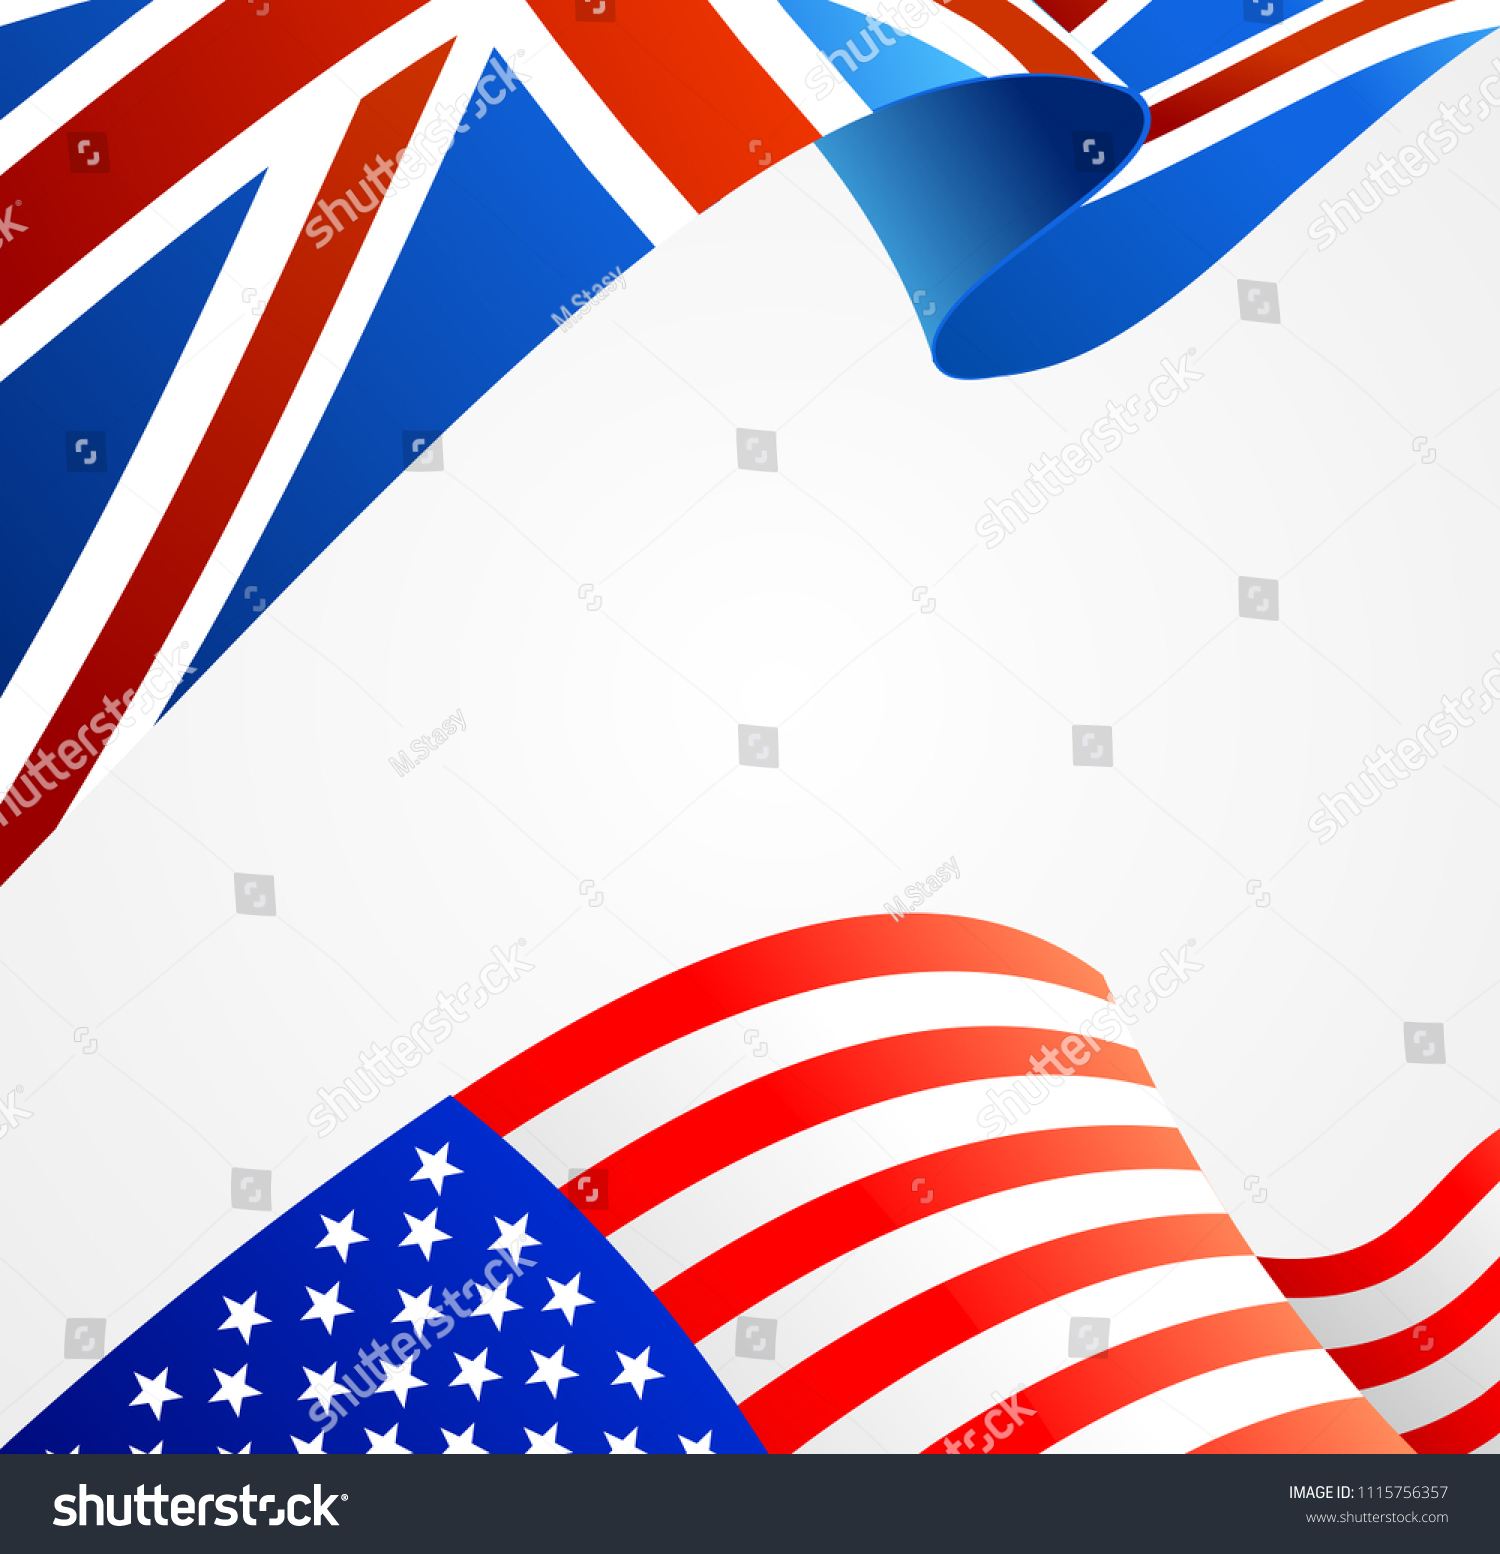 SVG of Realistic Detailed 3d United Kingdom and USA Flag Background Card. Vector illustration of England and American Wavy Flags svg